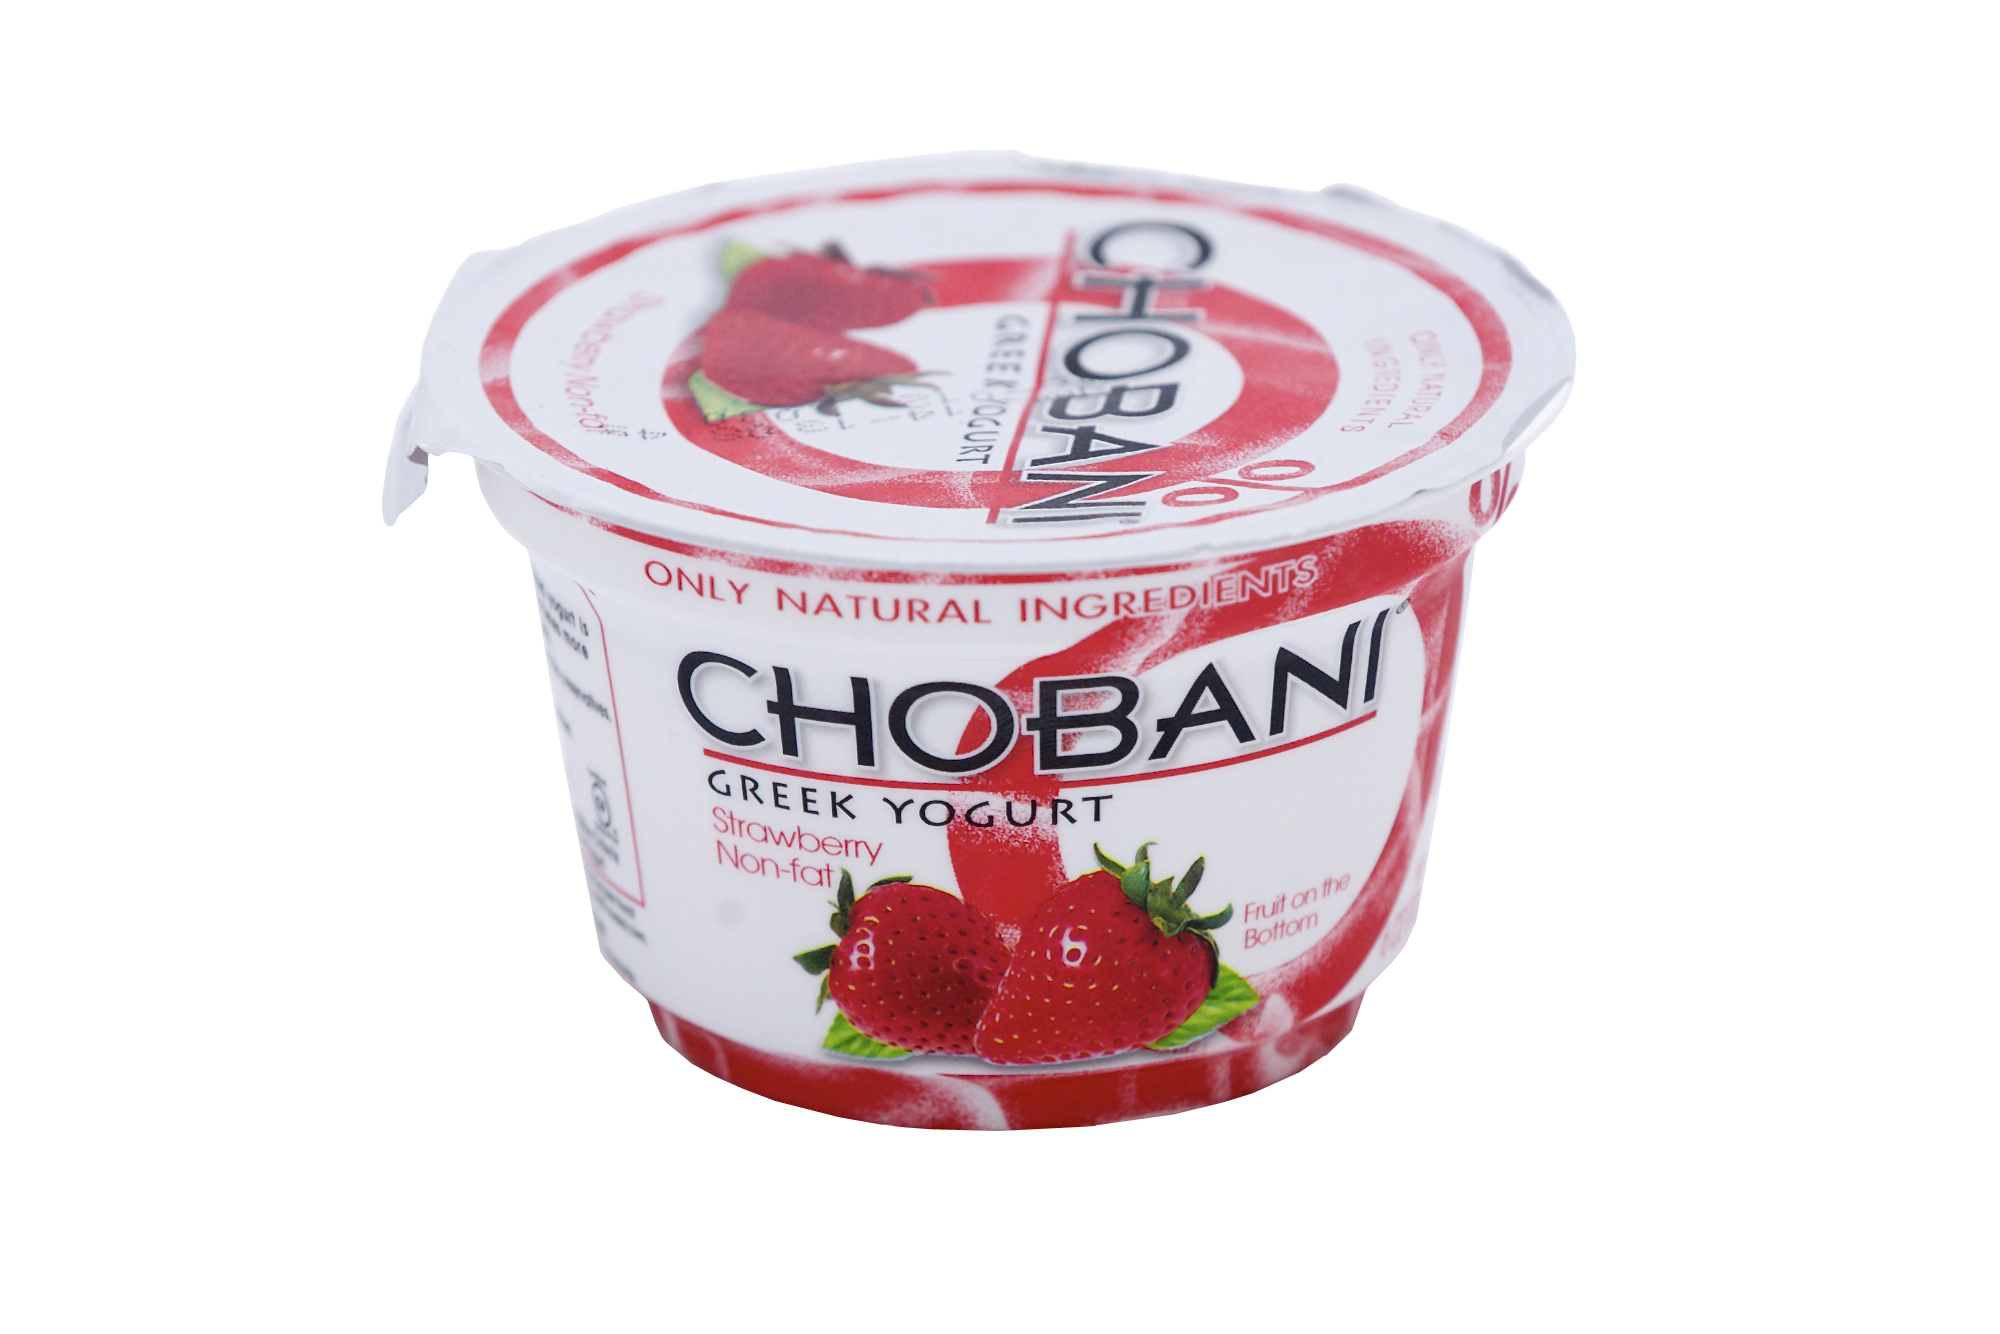 In 2012, Greek yogurt varieties accounted for 28 percent of the yogurt market, up from 16 percent the year before.